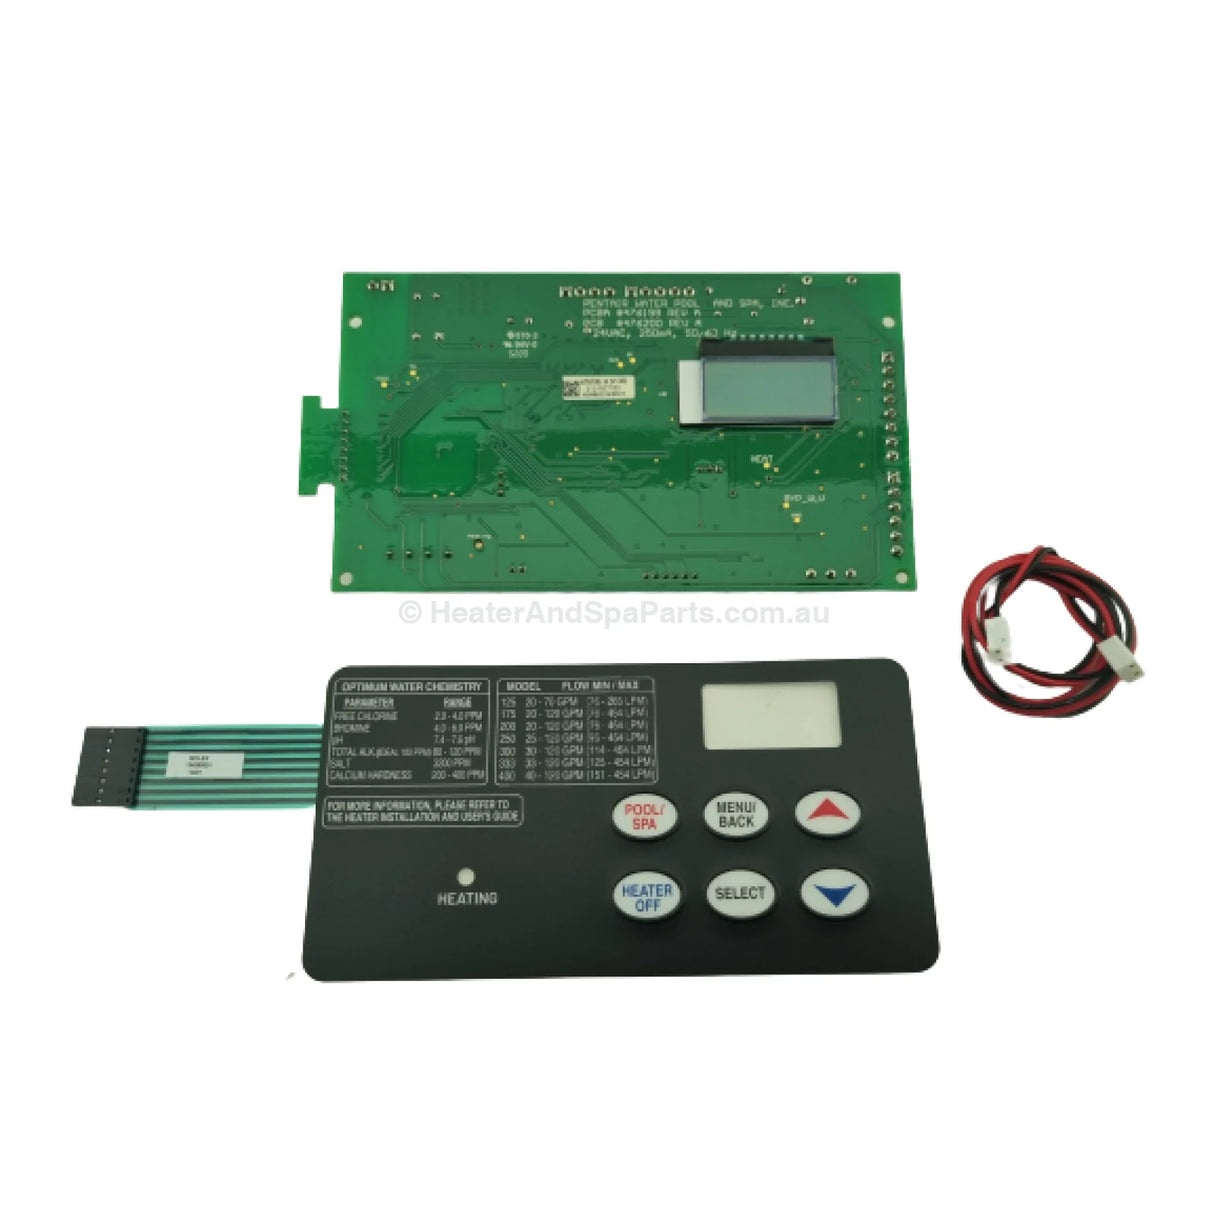 2021 Pentair Mastertemp / Waterco Turbotemp Main Control Board Pcb - New Style Gas Heater Parts